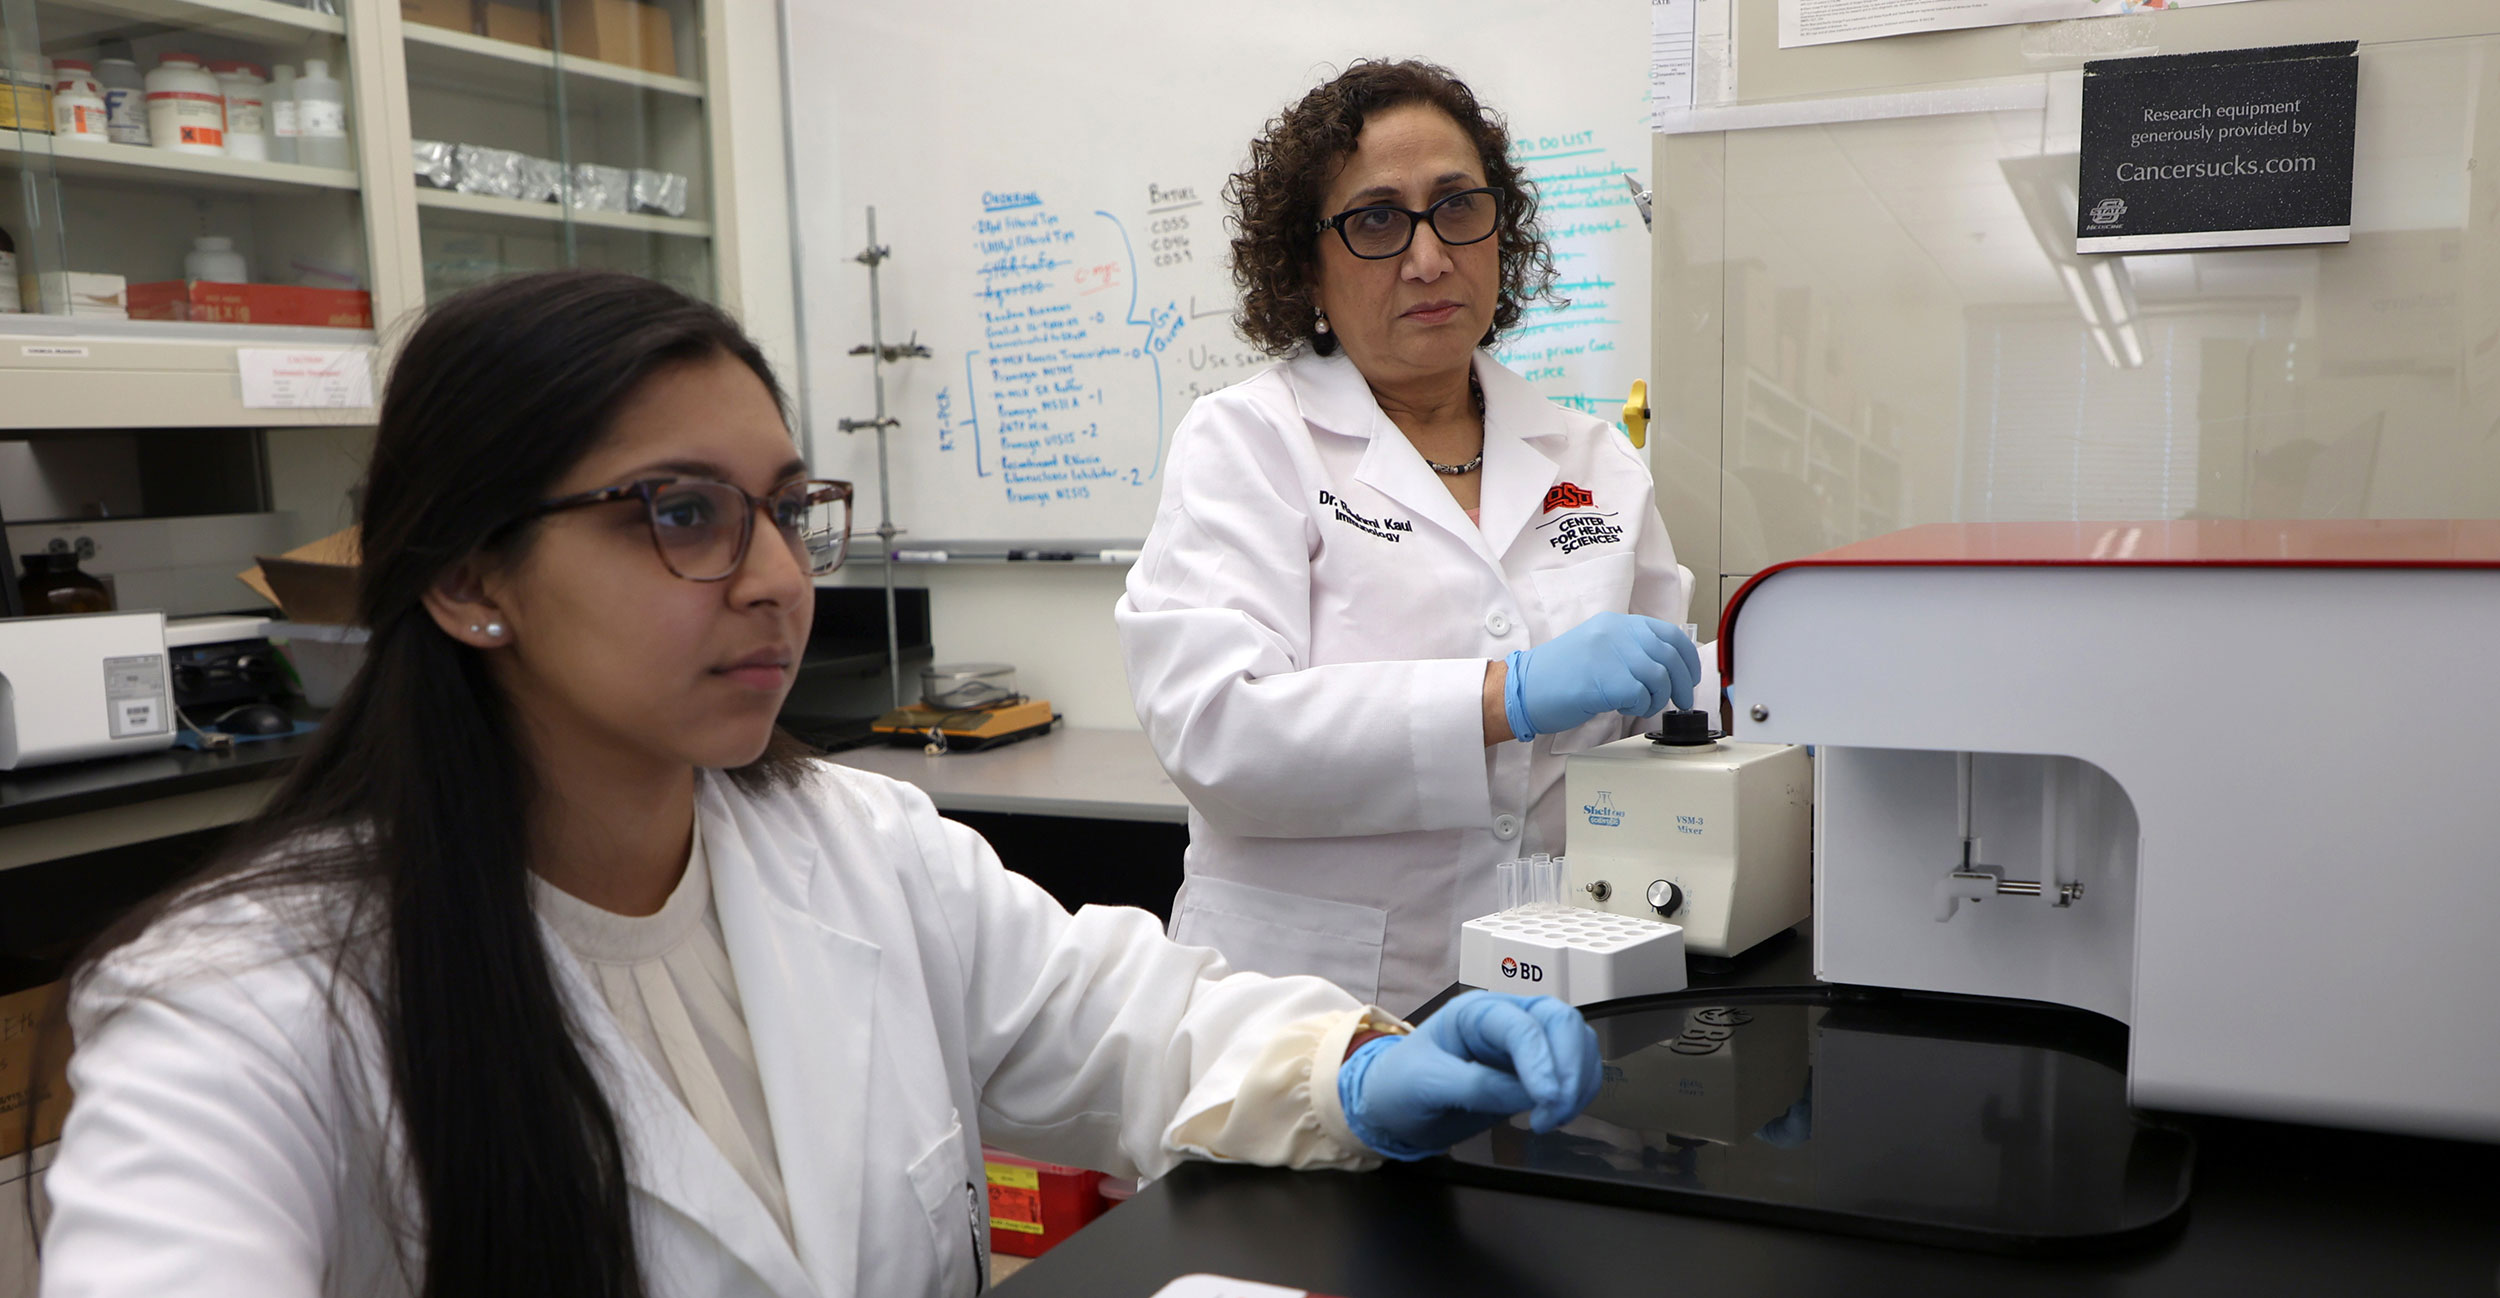 Biomedical Sciences student Sachi Pathak (left) and Rashmi Kaul, Ph.D., use a flow cytometer to analyze cells in Kaul's lab at OSU Center for Health Sciences.